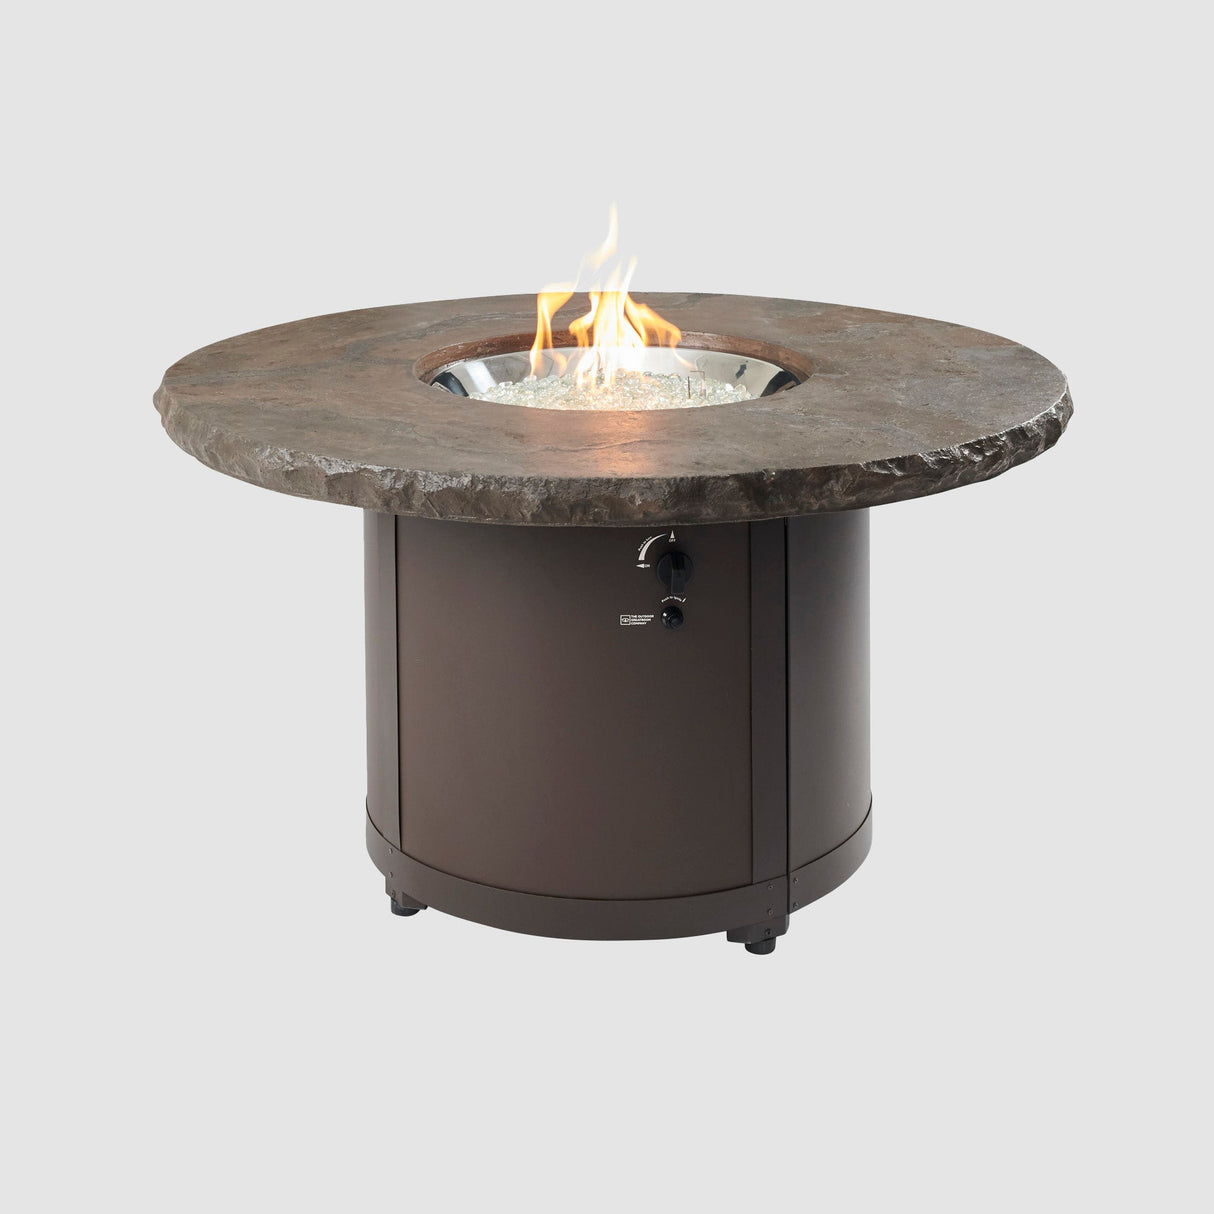 The Marbleized Noche Beacon Round Gas Fire Pit Table on a grey background